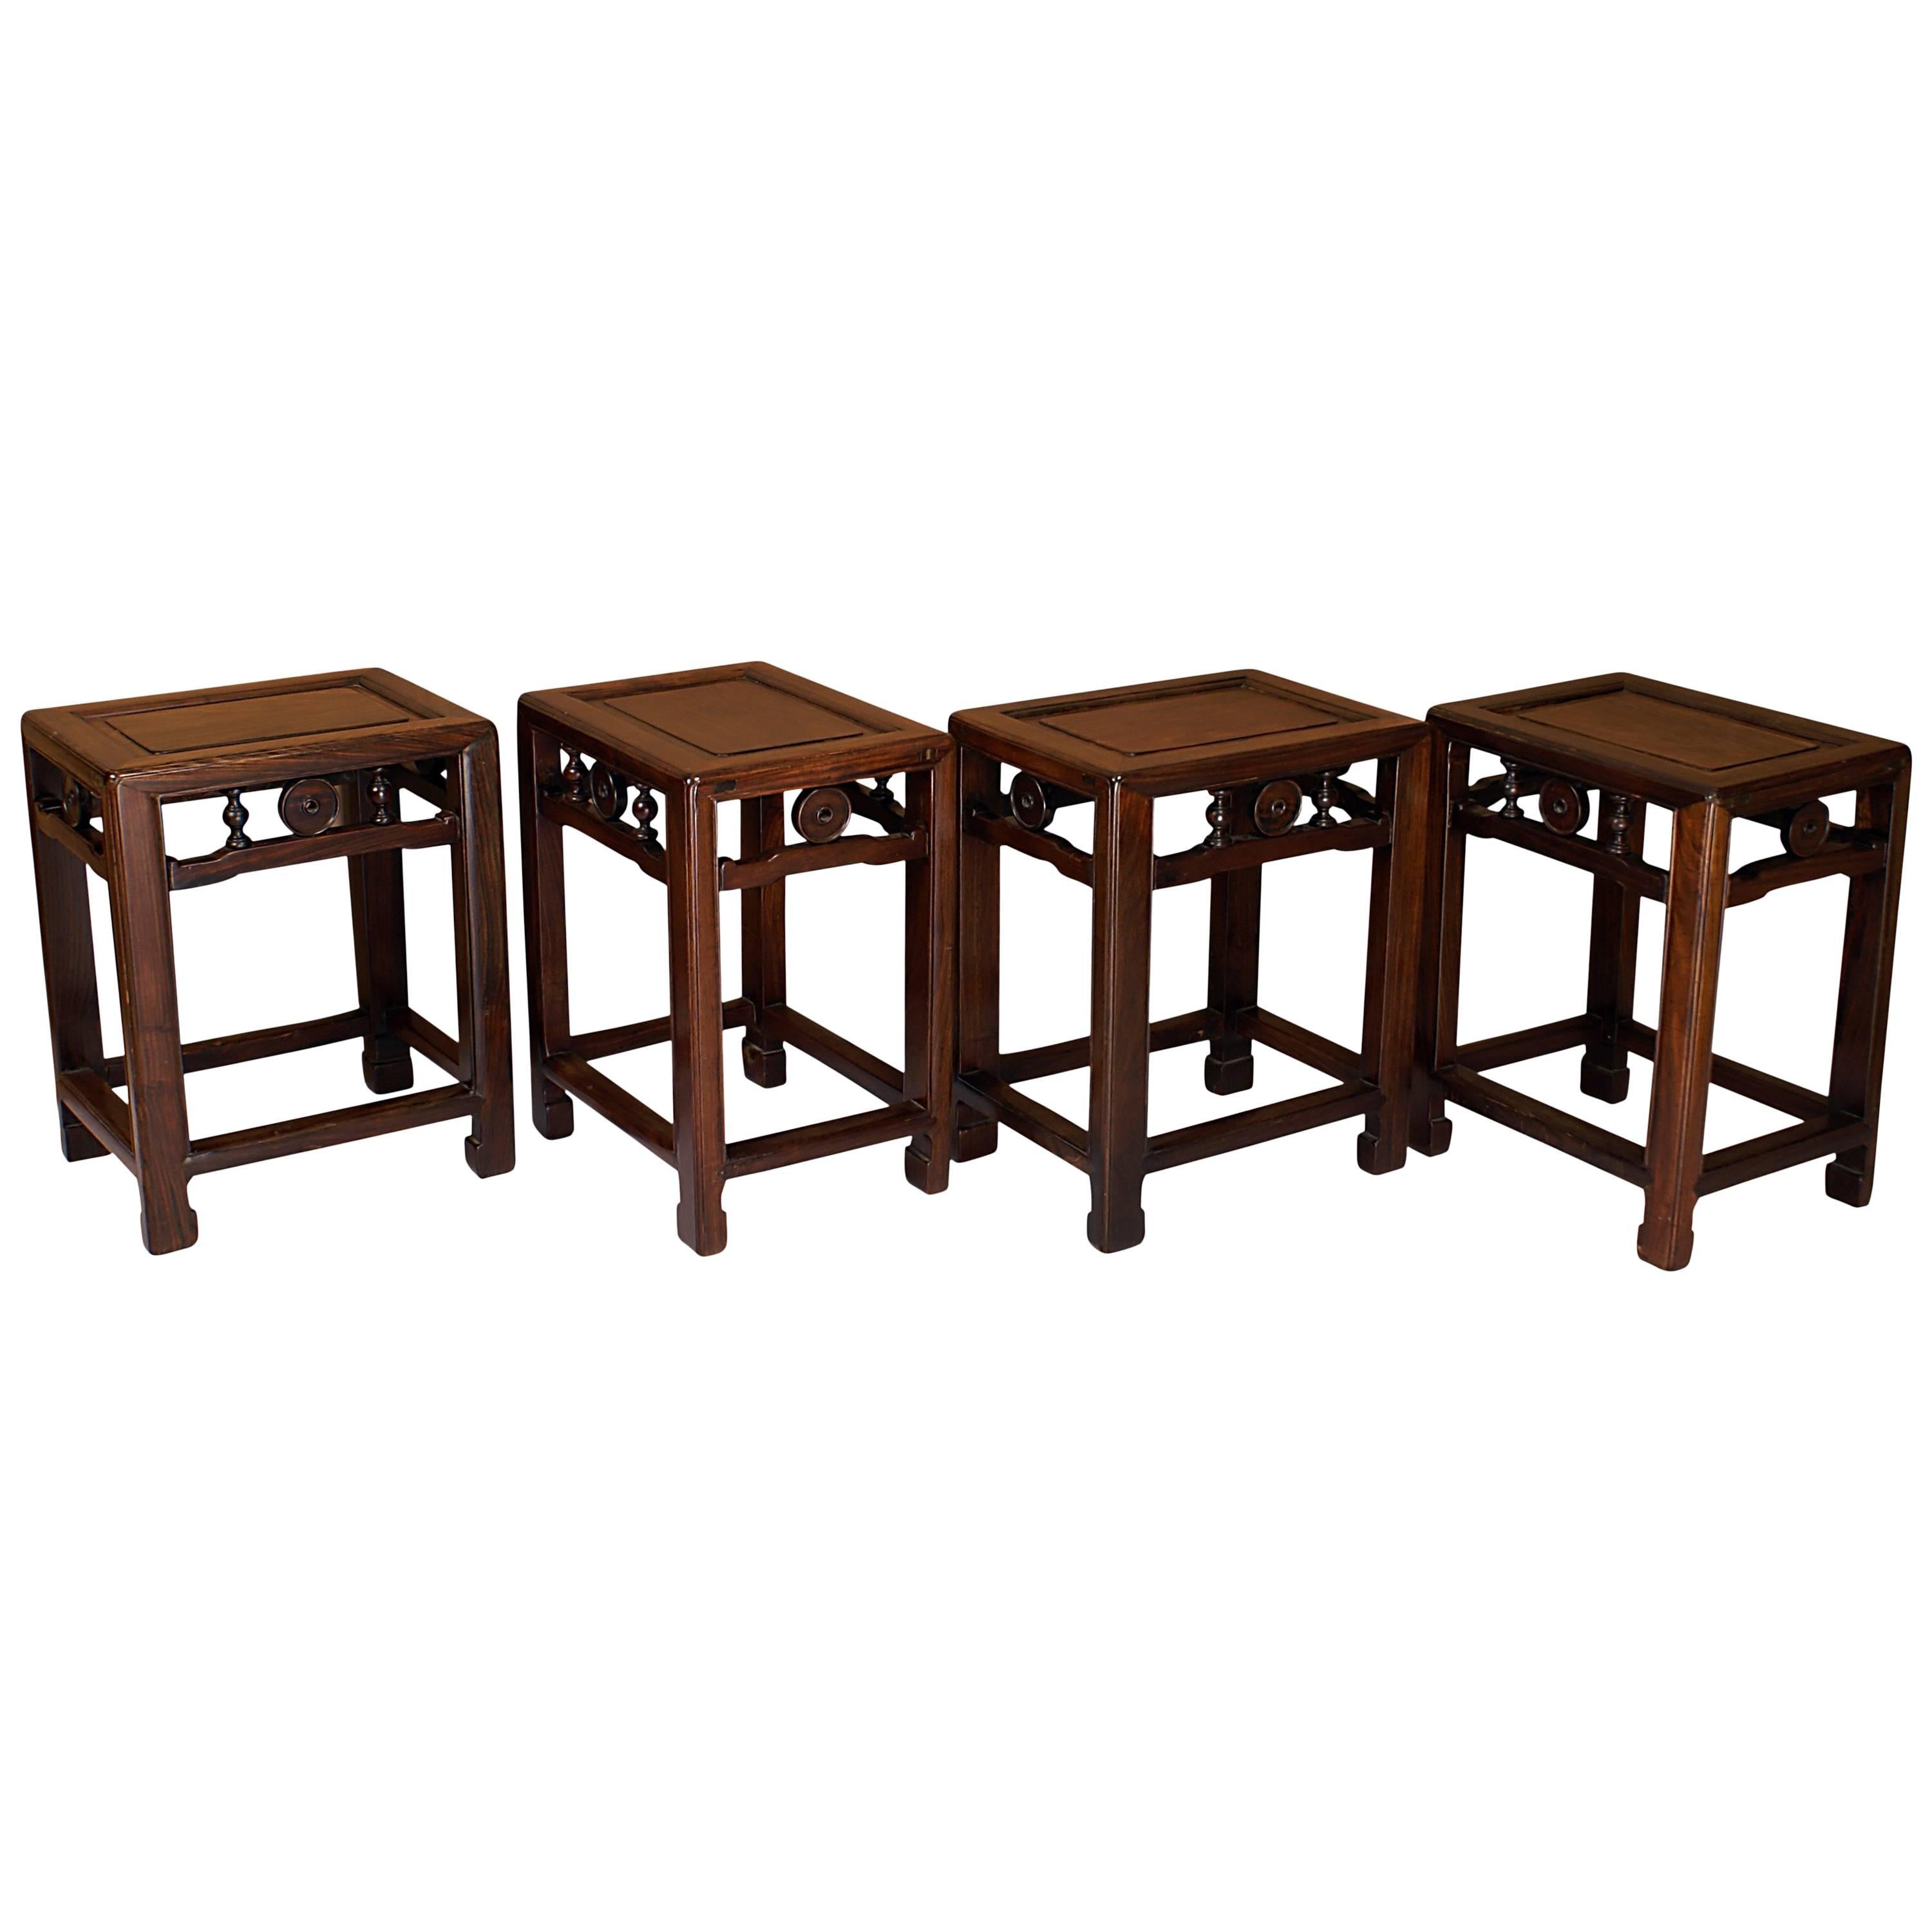 Four Chinese Hong Mu Stools in Ming Style, circa 1920